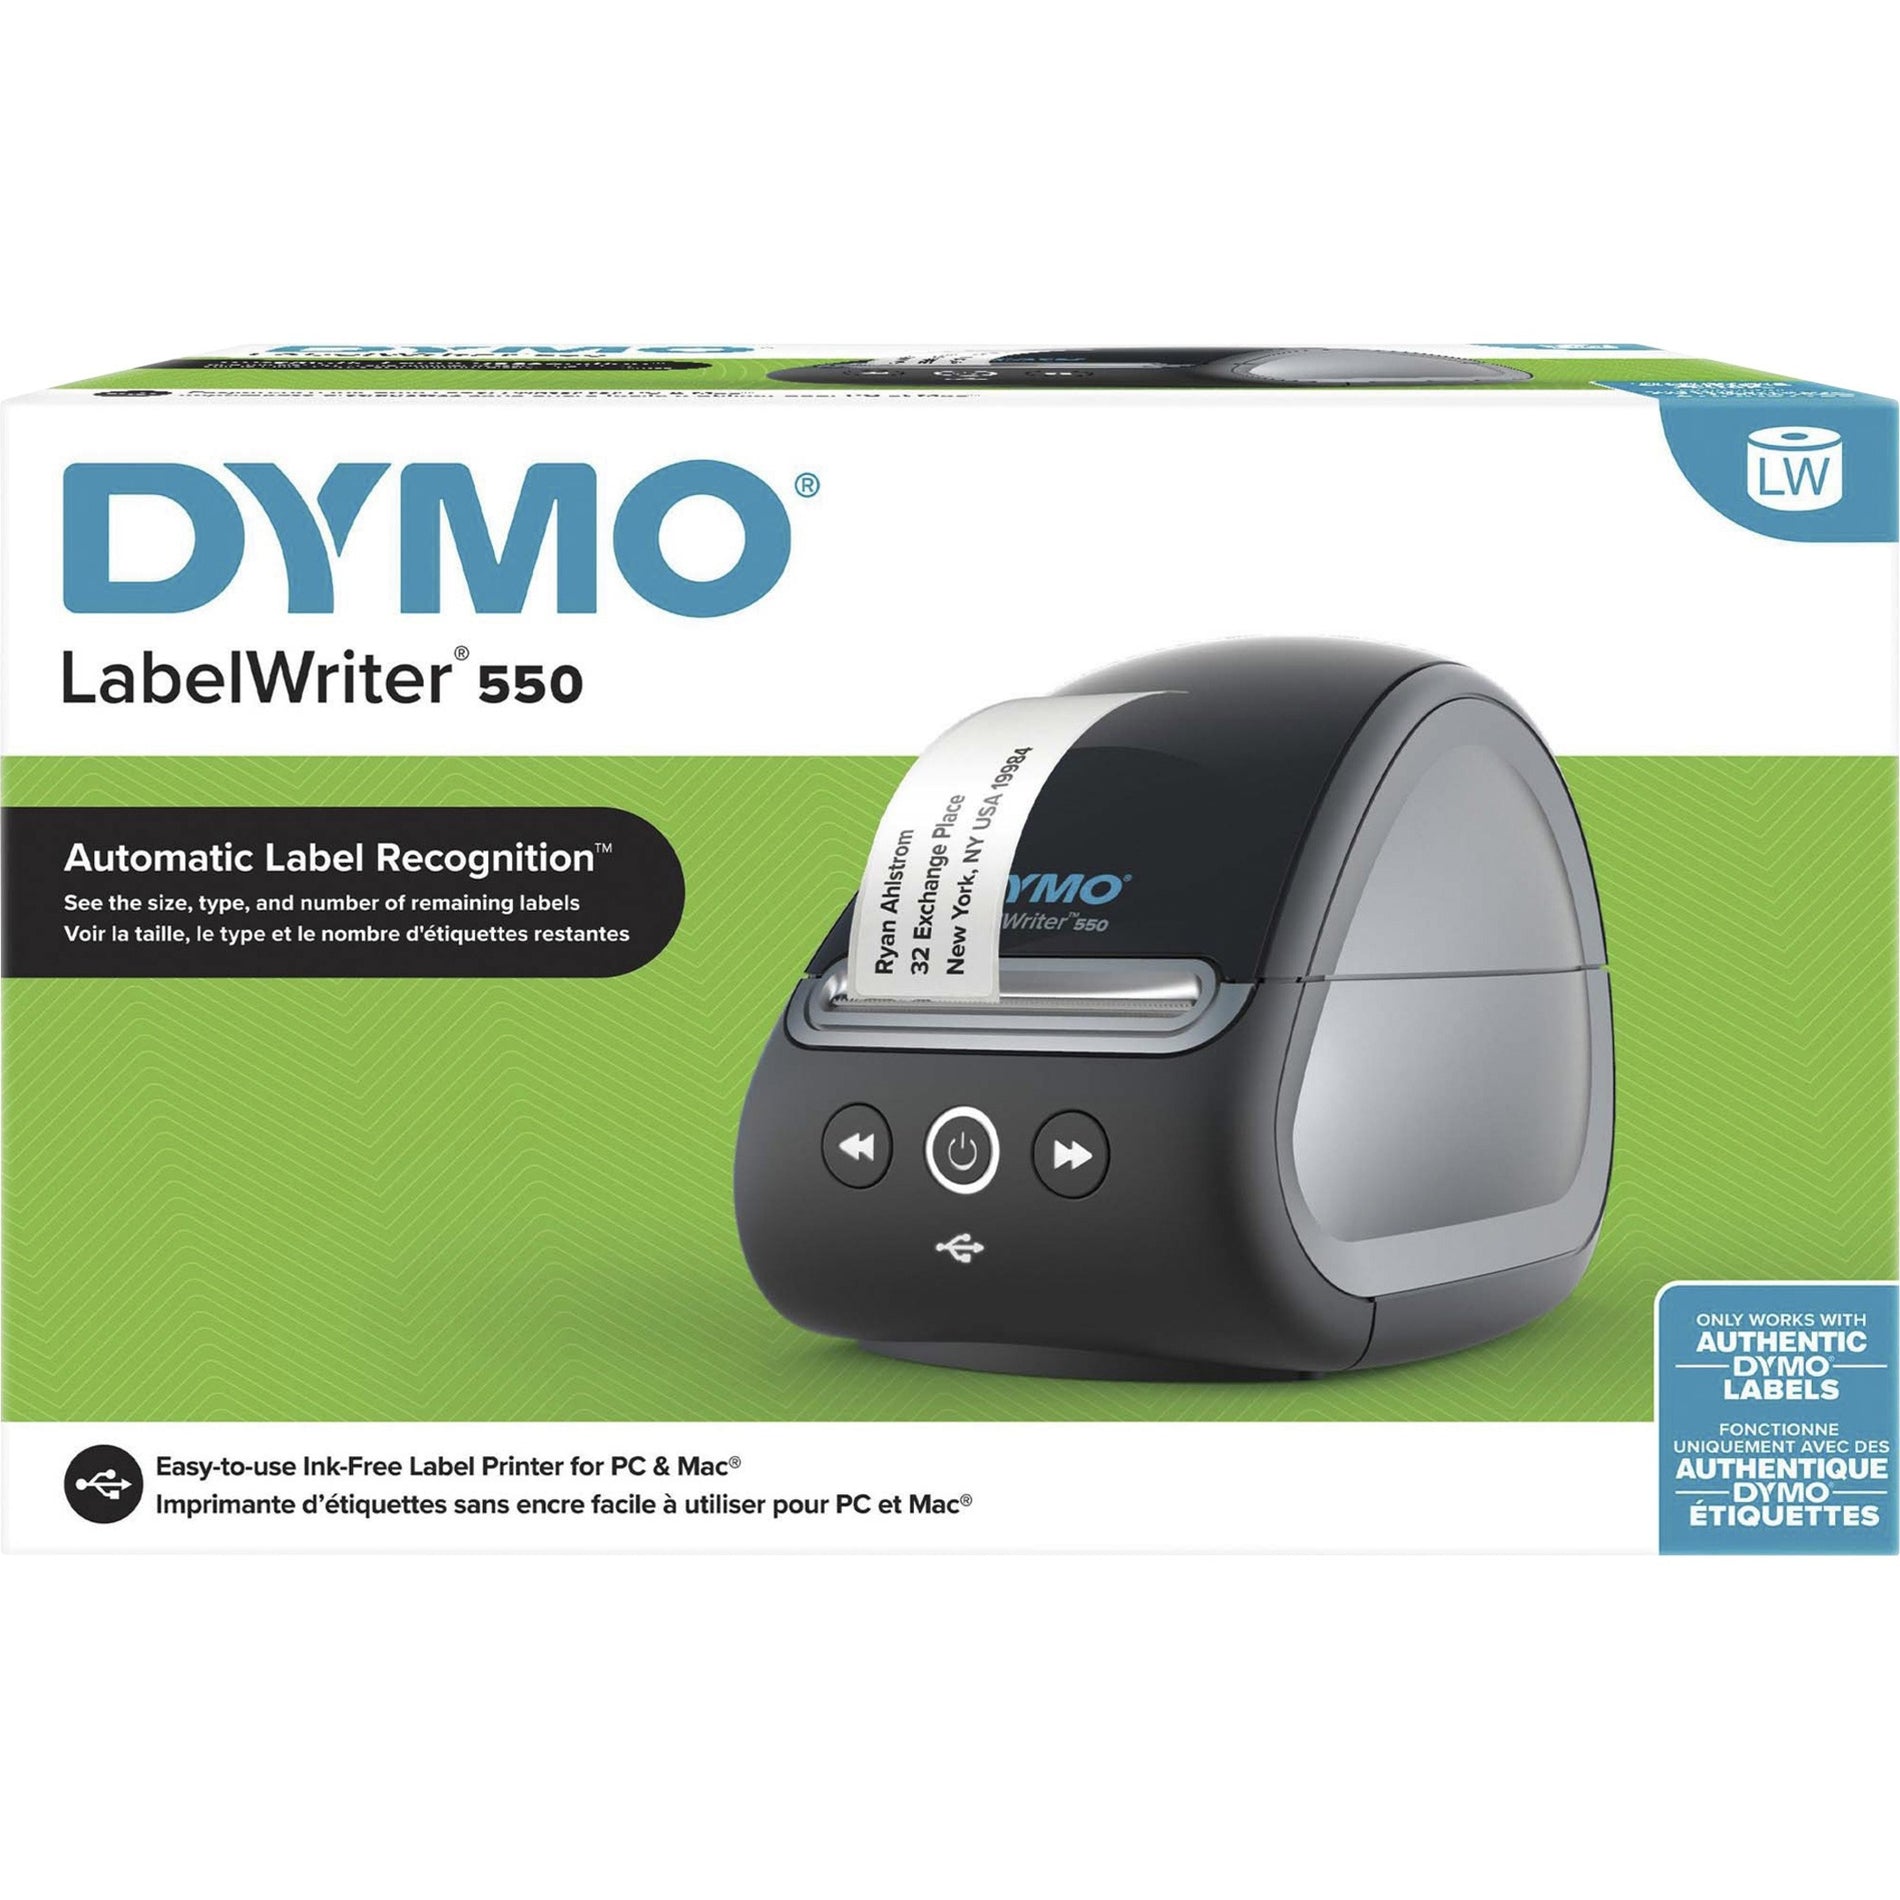 Dymo 2112552 LabelWriter 550 Label Printer, Direct Thermal Printer, 2 Year Warranty, USB and USB Host, Mac and PC Compatible